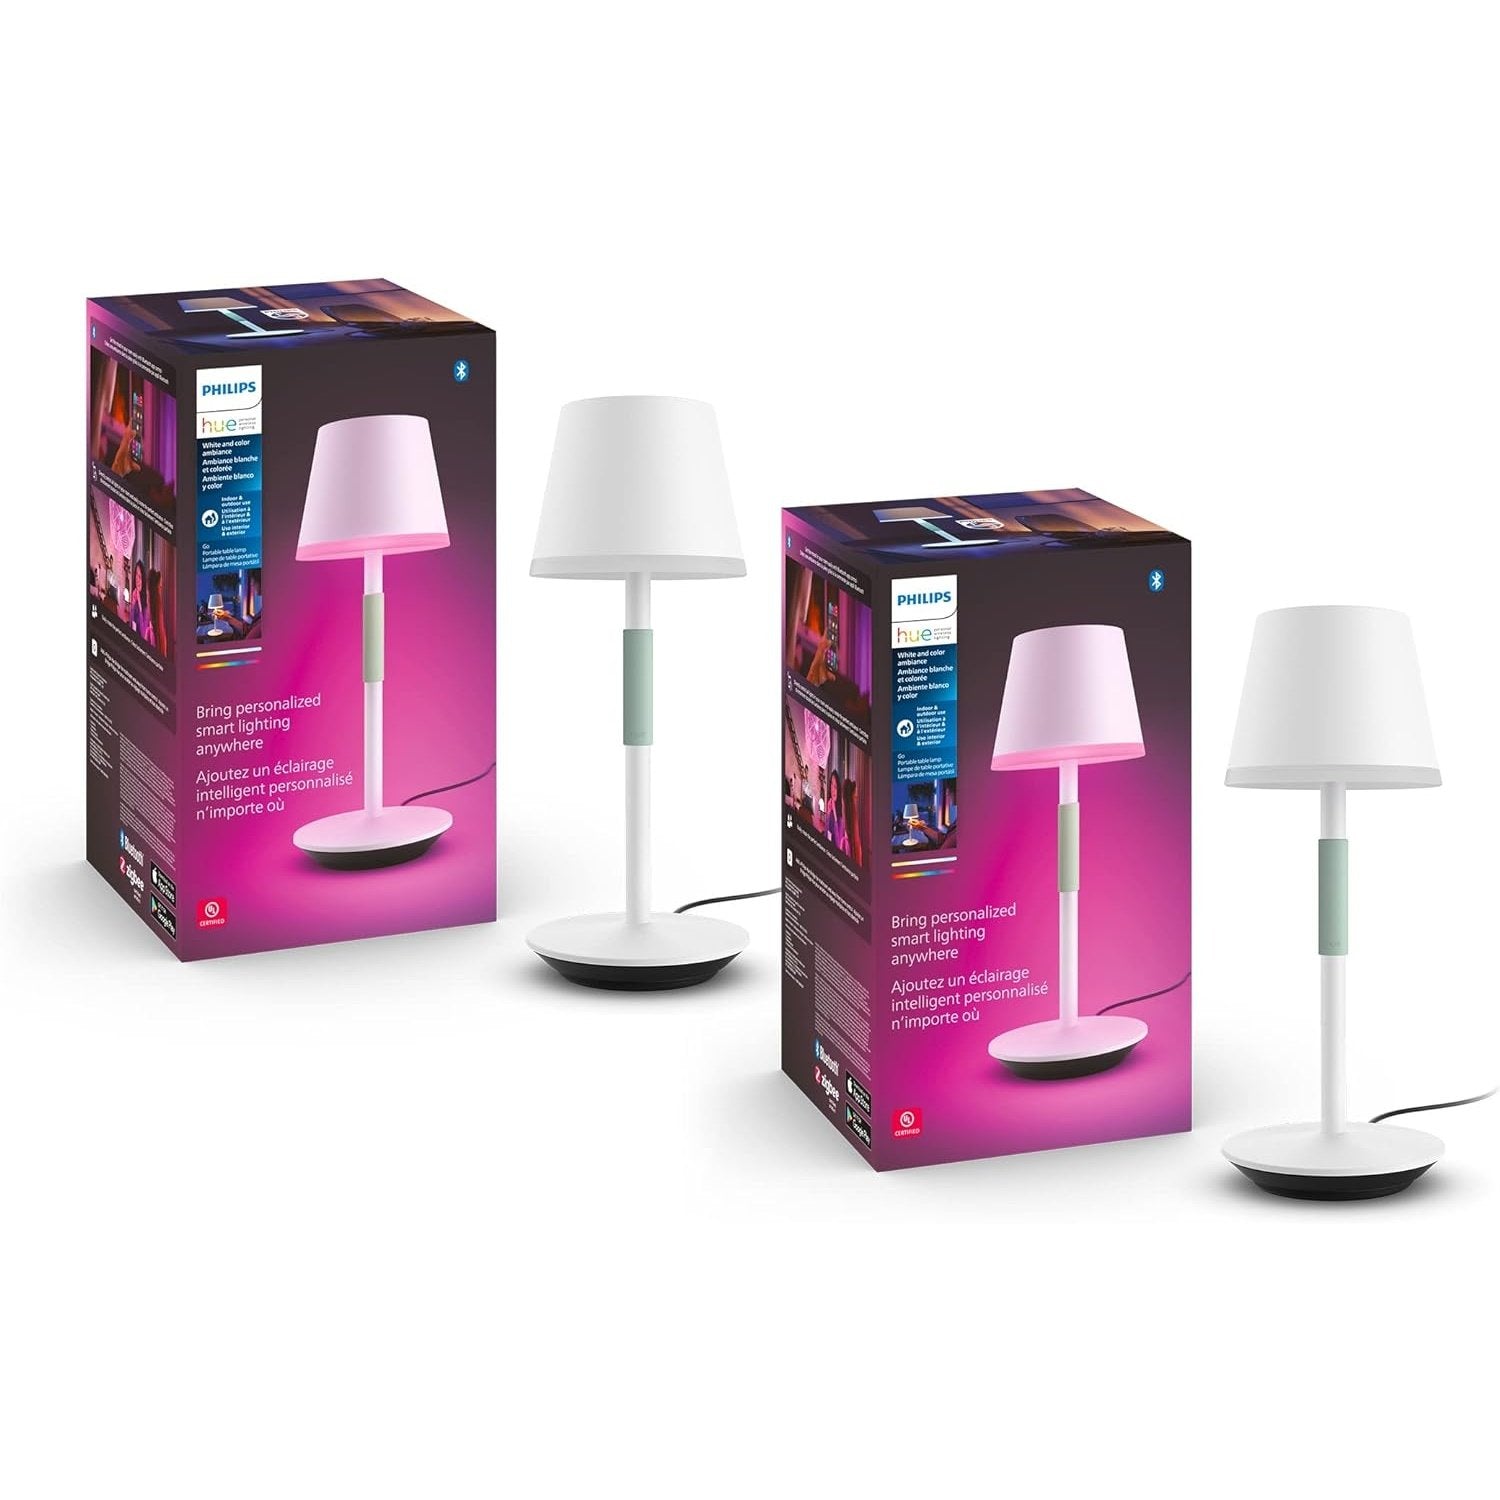 Philips Hue Go Smart Portable Table Lamp, Black - White and Color Ambiance LED Color-Changing Light - 1 Pack - Indoor and Outdoor Use - Control with Hue App or Voice Assistant